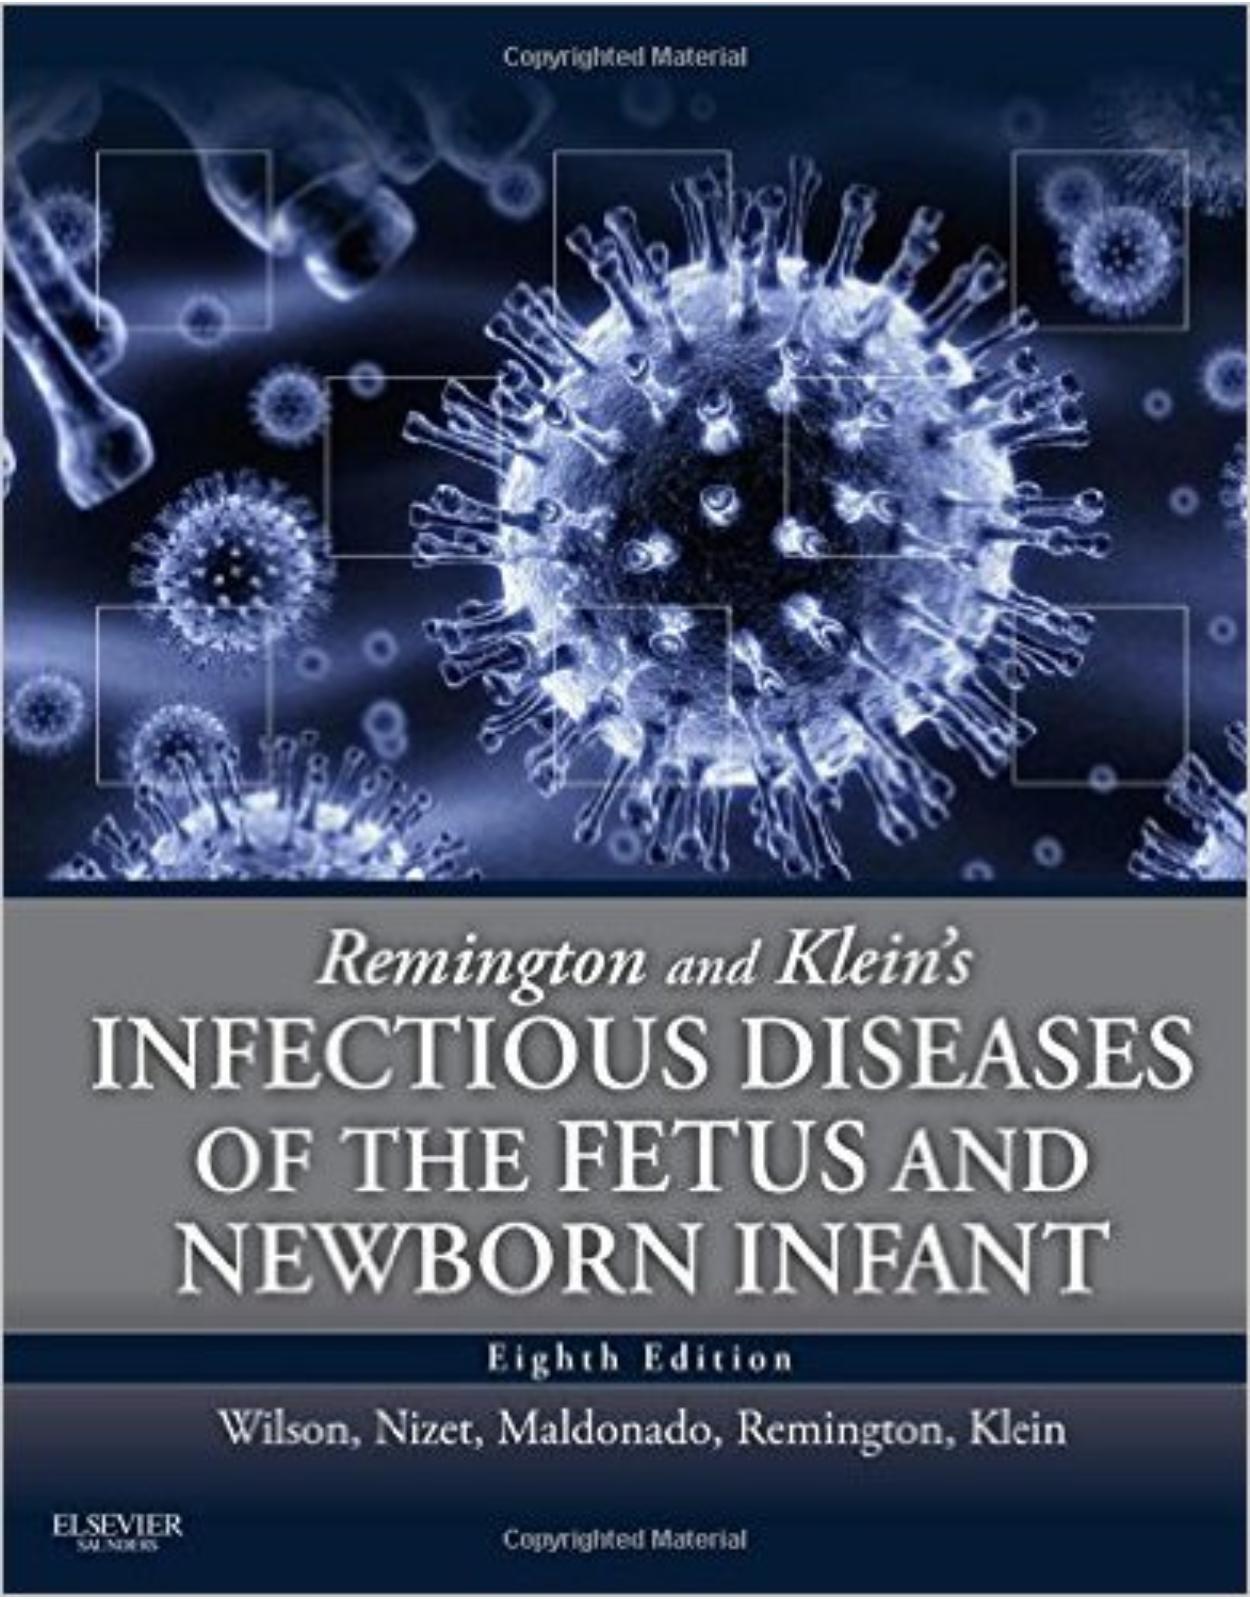 Remington and Klein s Infectious Diseases of the Fetus and Newborn Infant, 8e